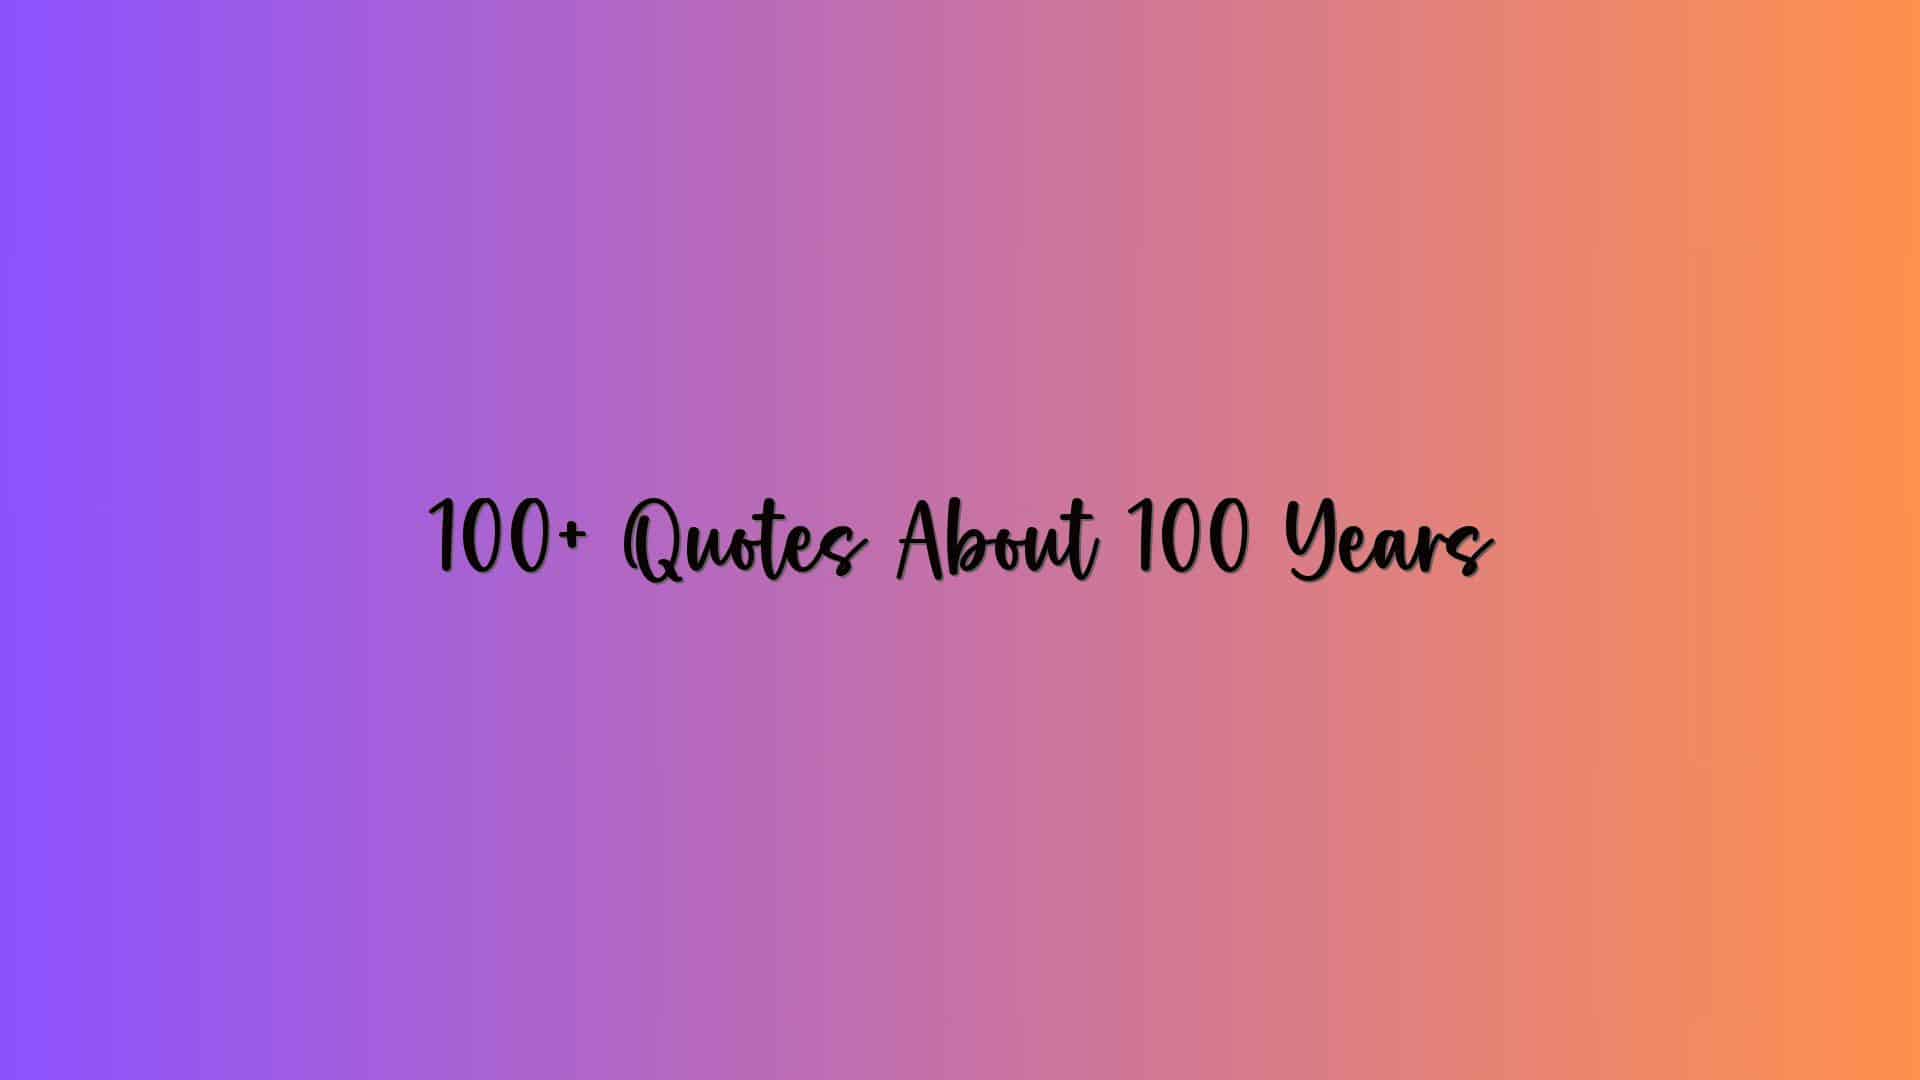 100+ Quotes About 100 Years